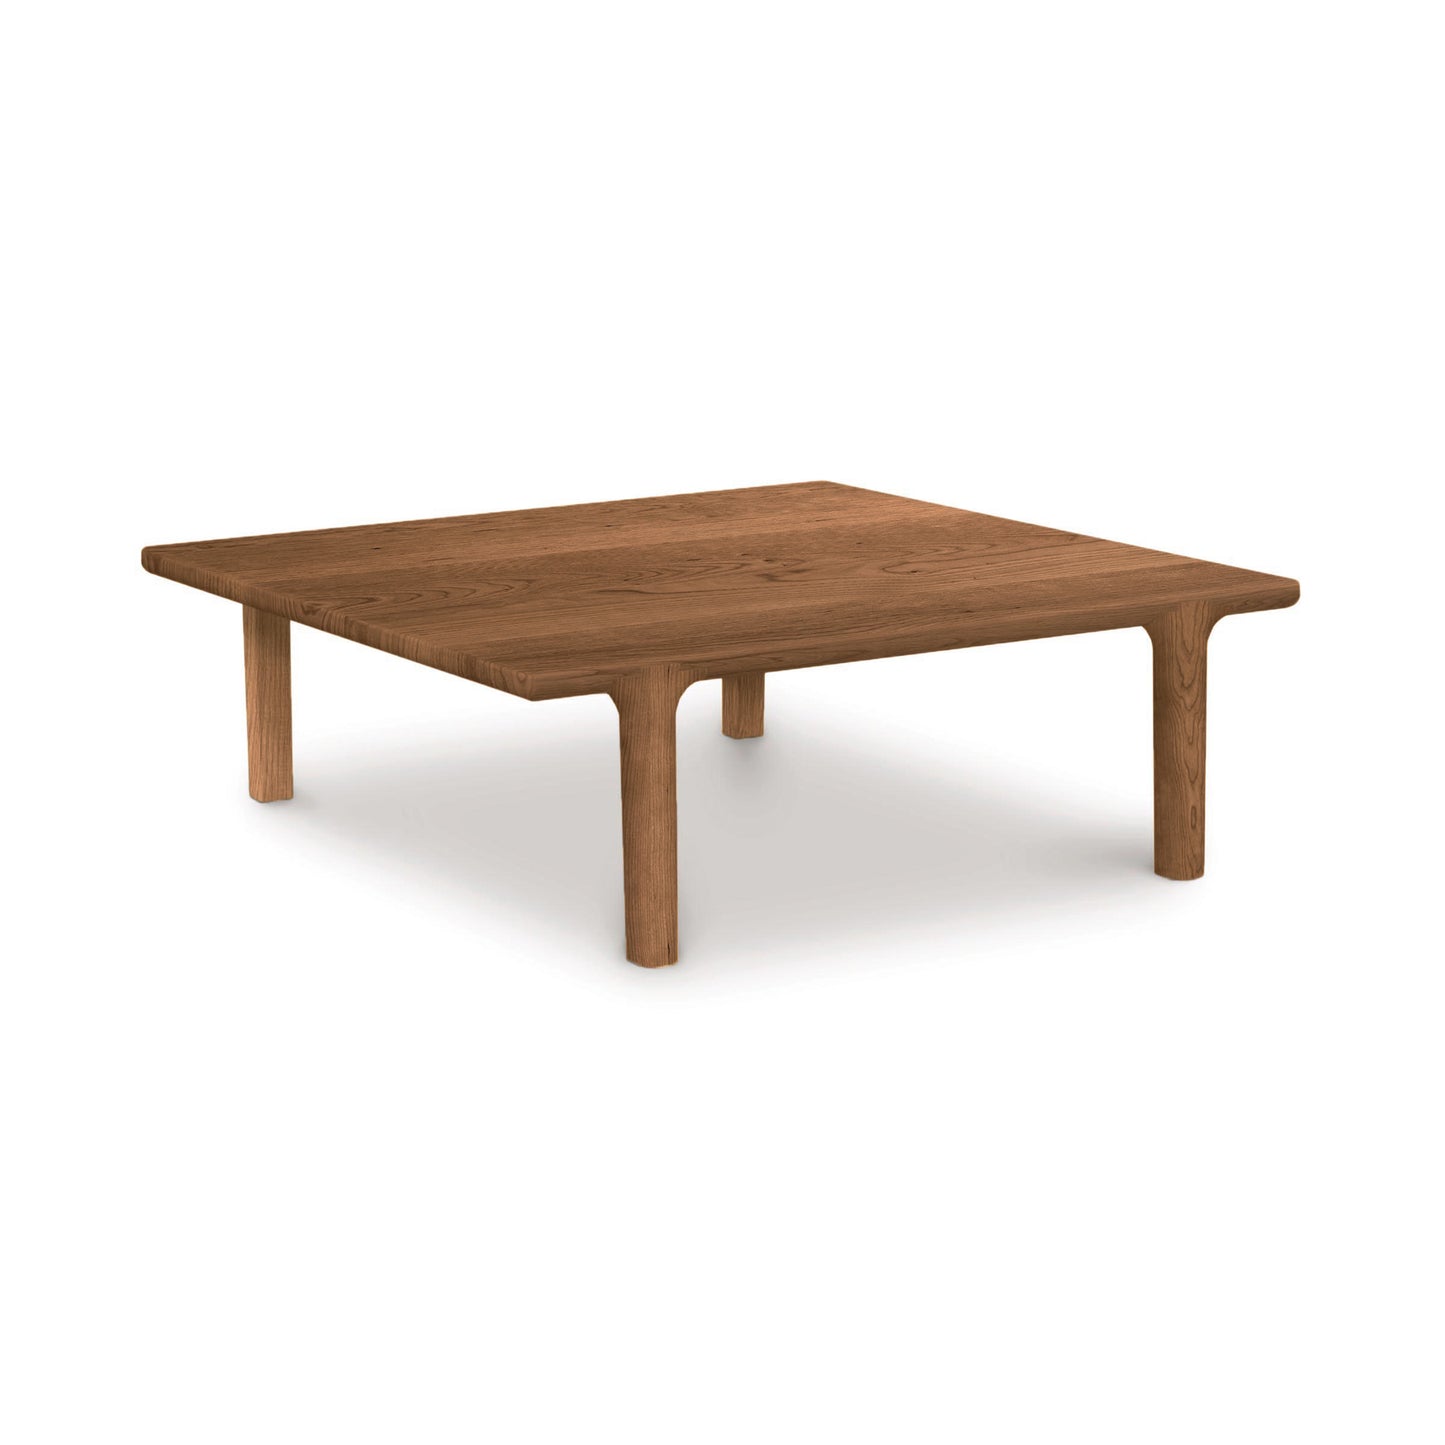 A wooden, low-profile Copeland Furniture Sierra Square Coffee Table with a contemporary design set against an isolated background.